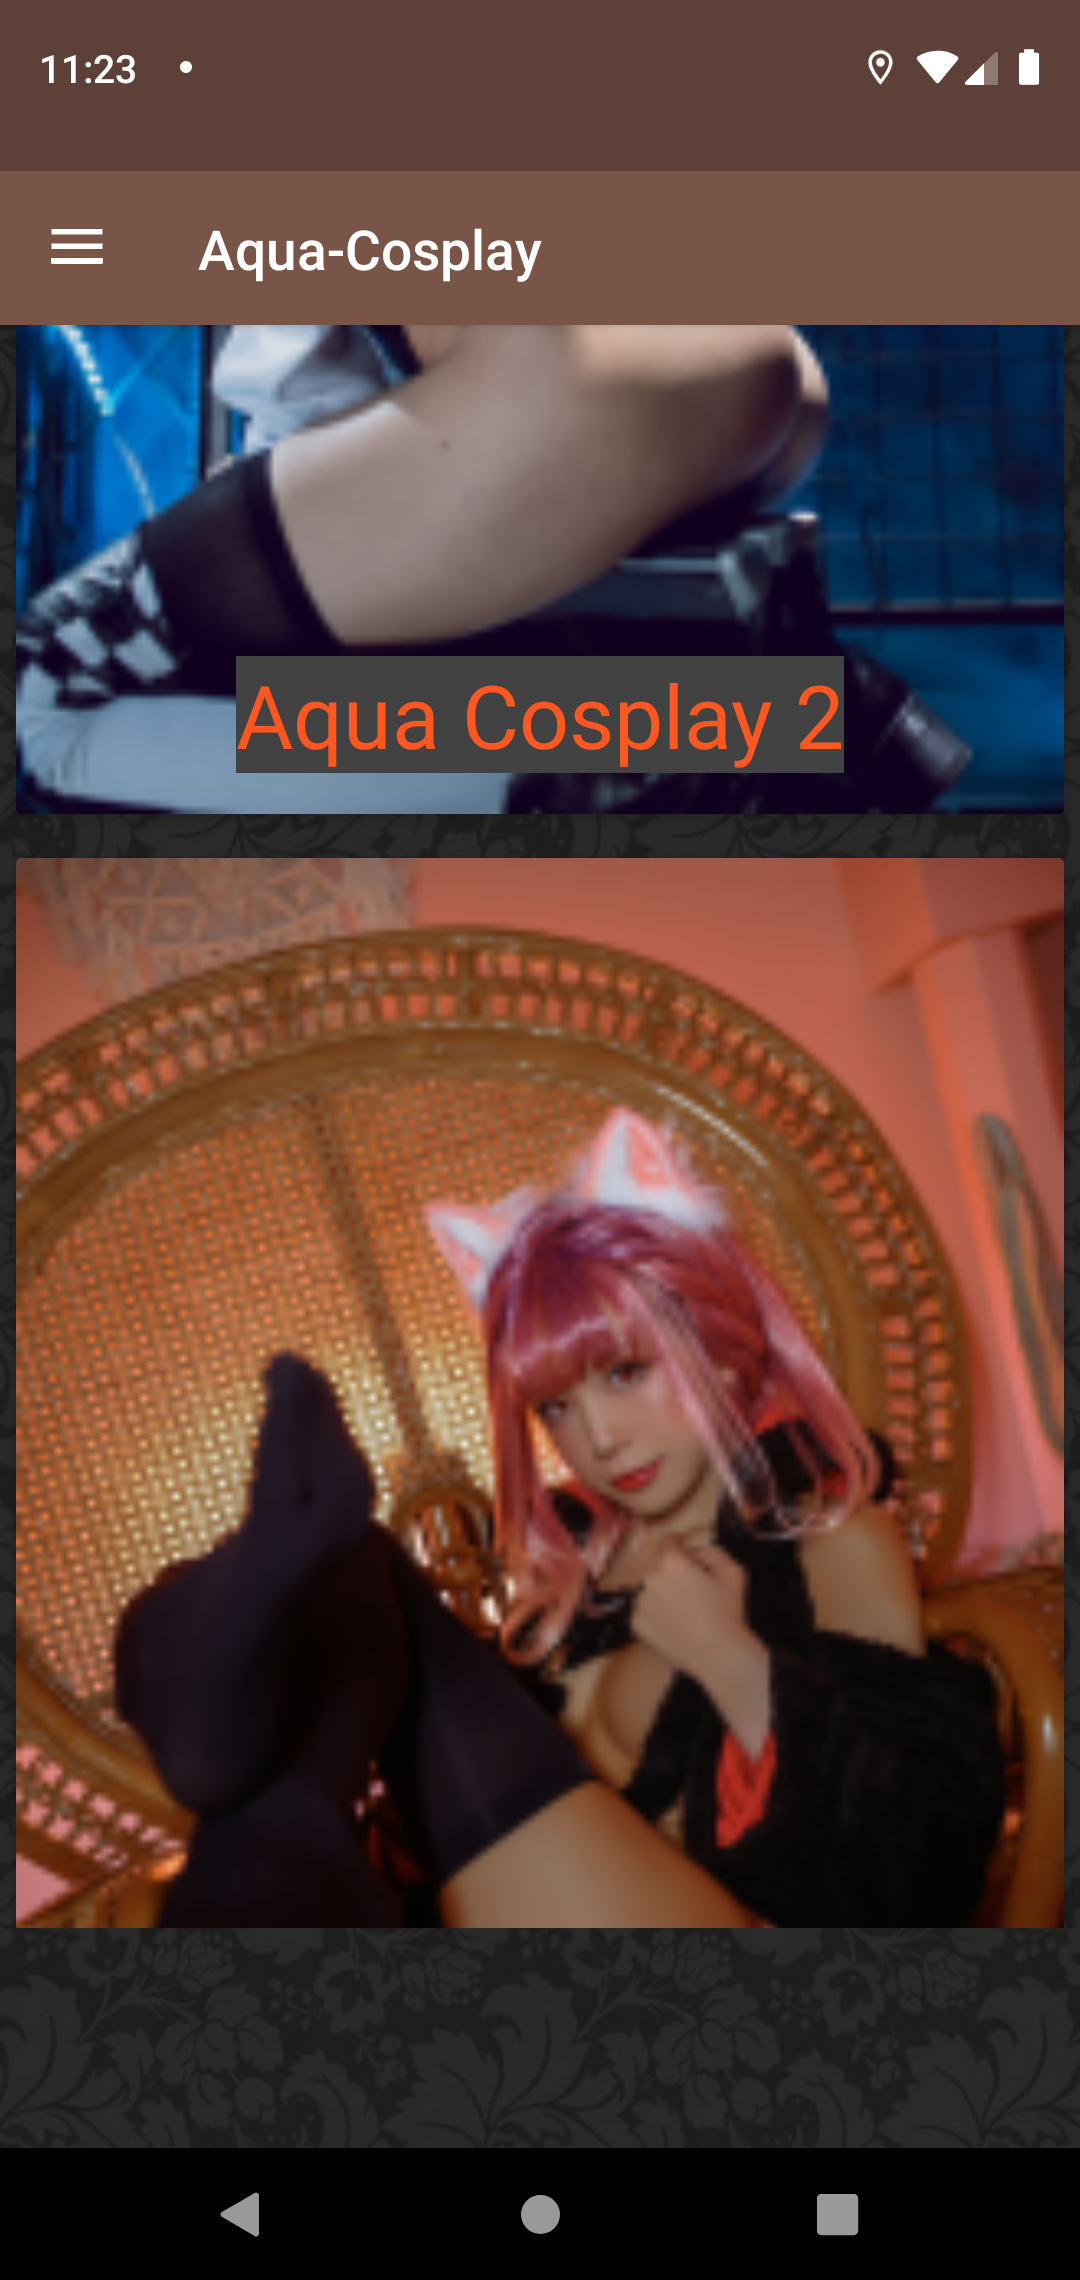 Aqua Cosplay cosplay,hentia,apk,collection,photo,downloads,pic,pictures,sexyteengalleries,hetai,download,photos,hentai,gallery,android,porn,editor,image,apps,picture,pics